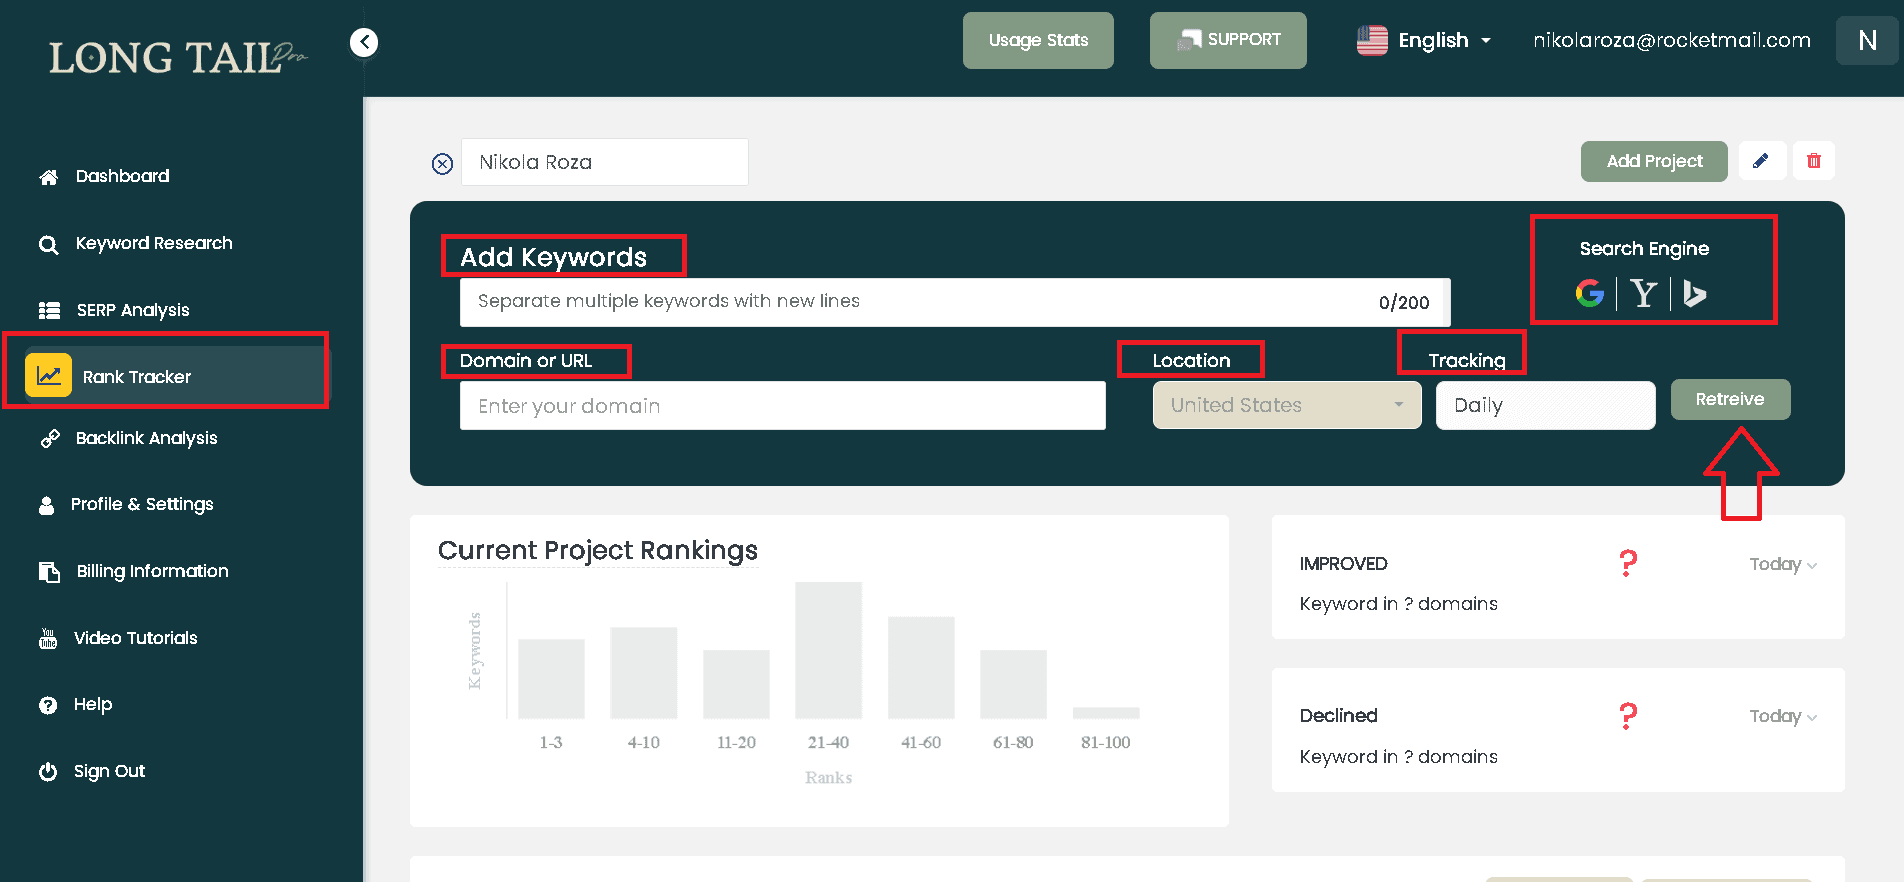 Long Tail Pro Rank Tracker- add your project